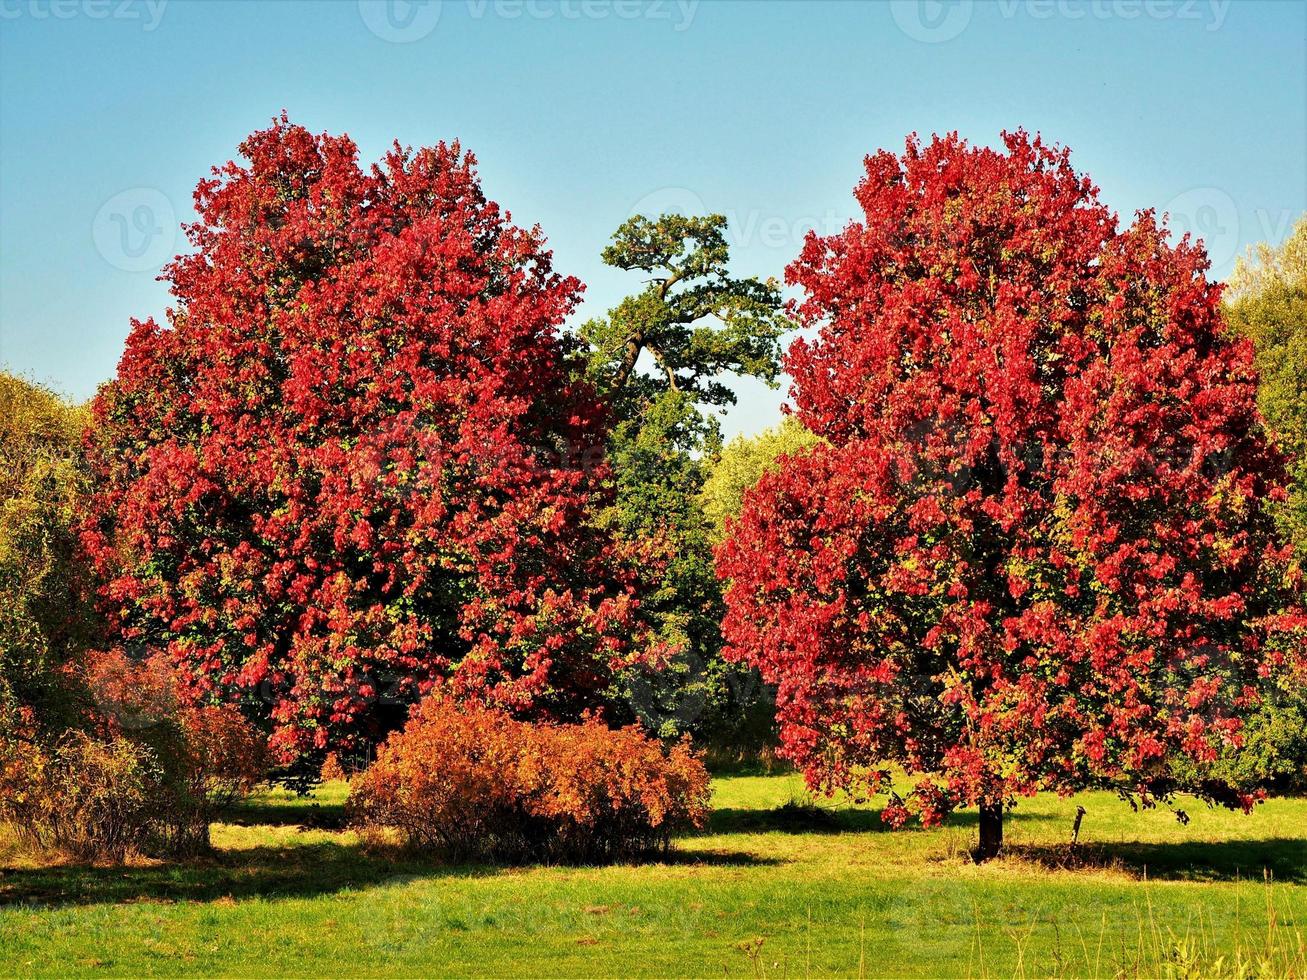 Beautiful October Glory maple trees with red autumn foliage photo